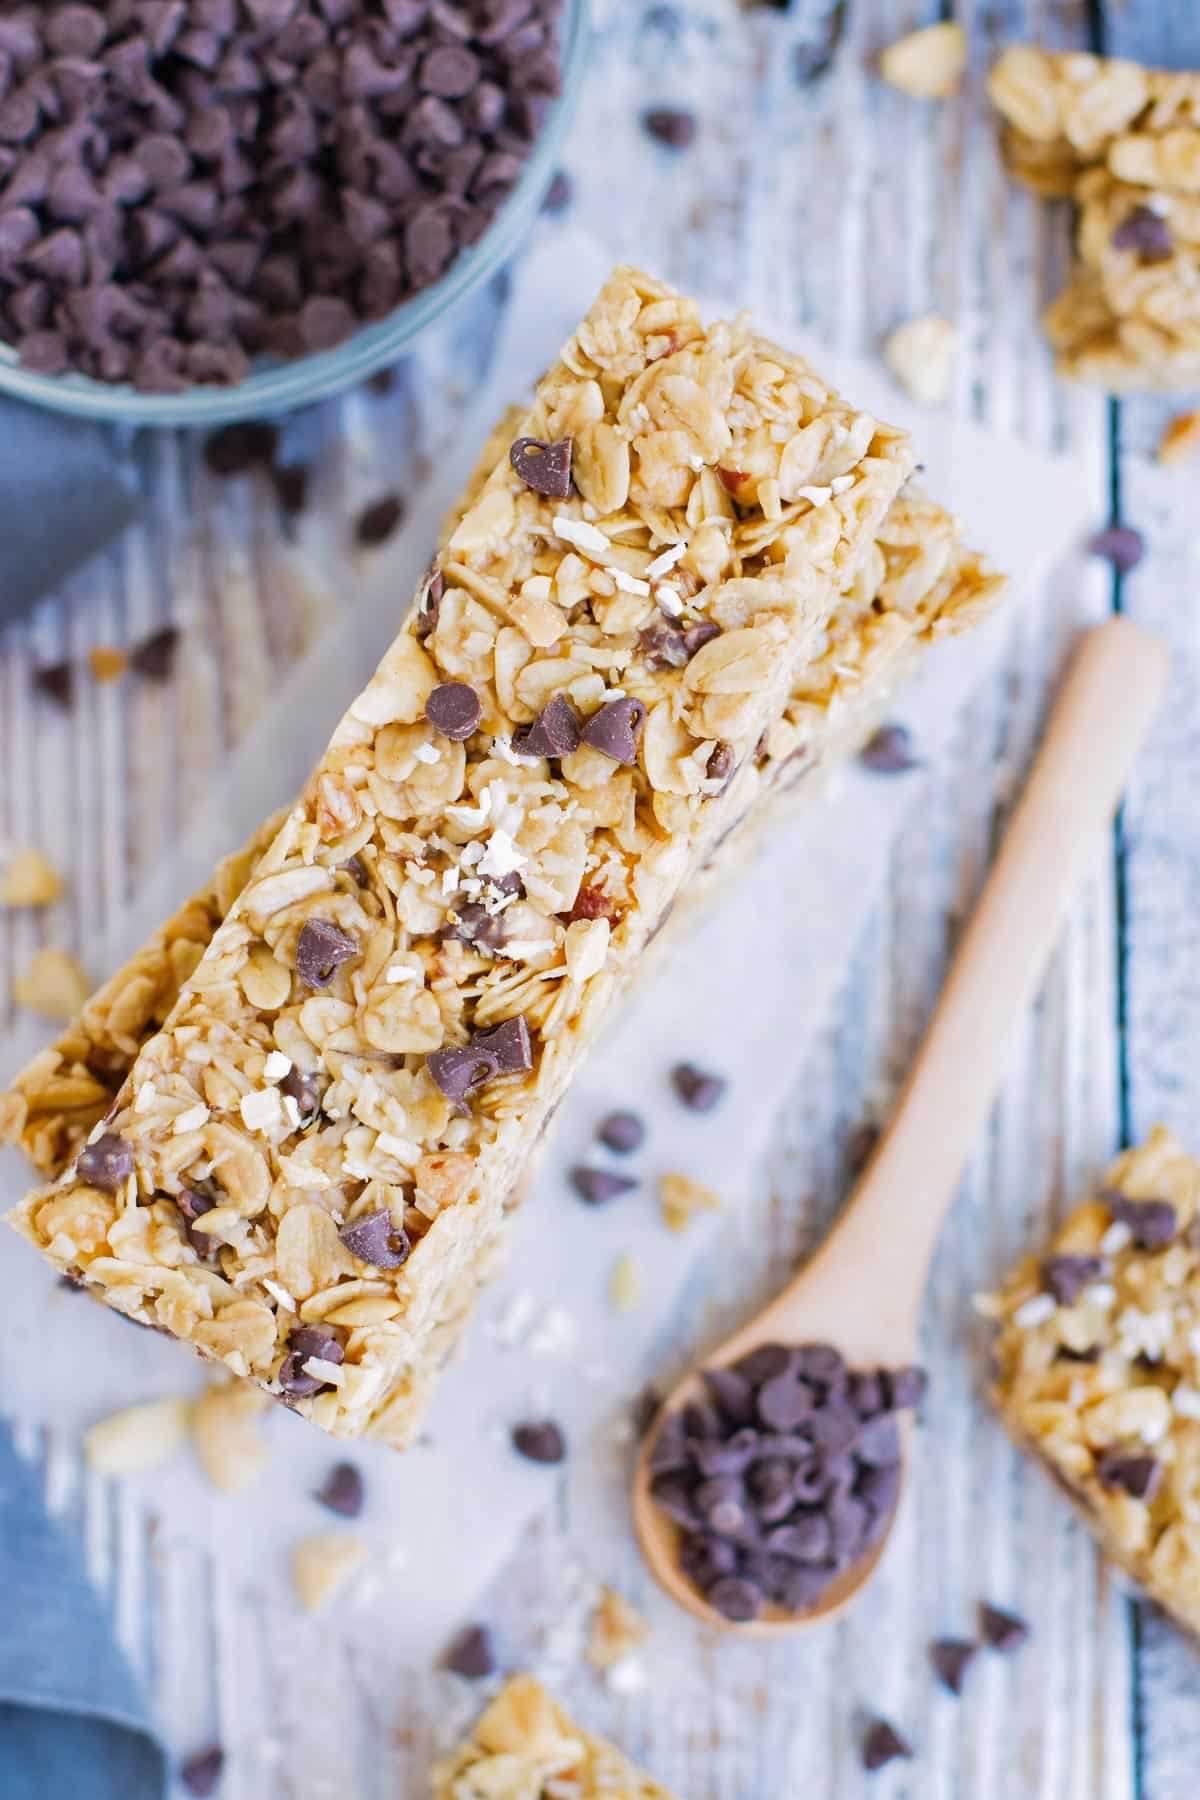 No bake granola bars in a pile with a bowl of chocolate chips on the side.